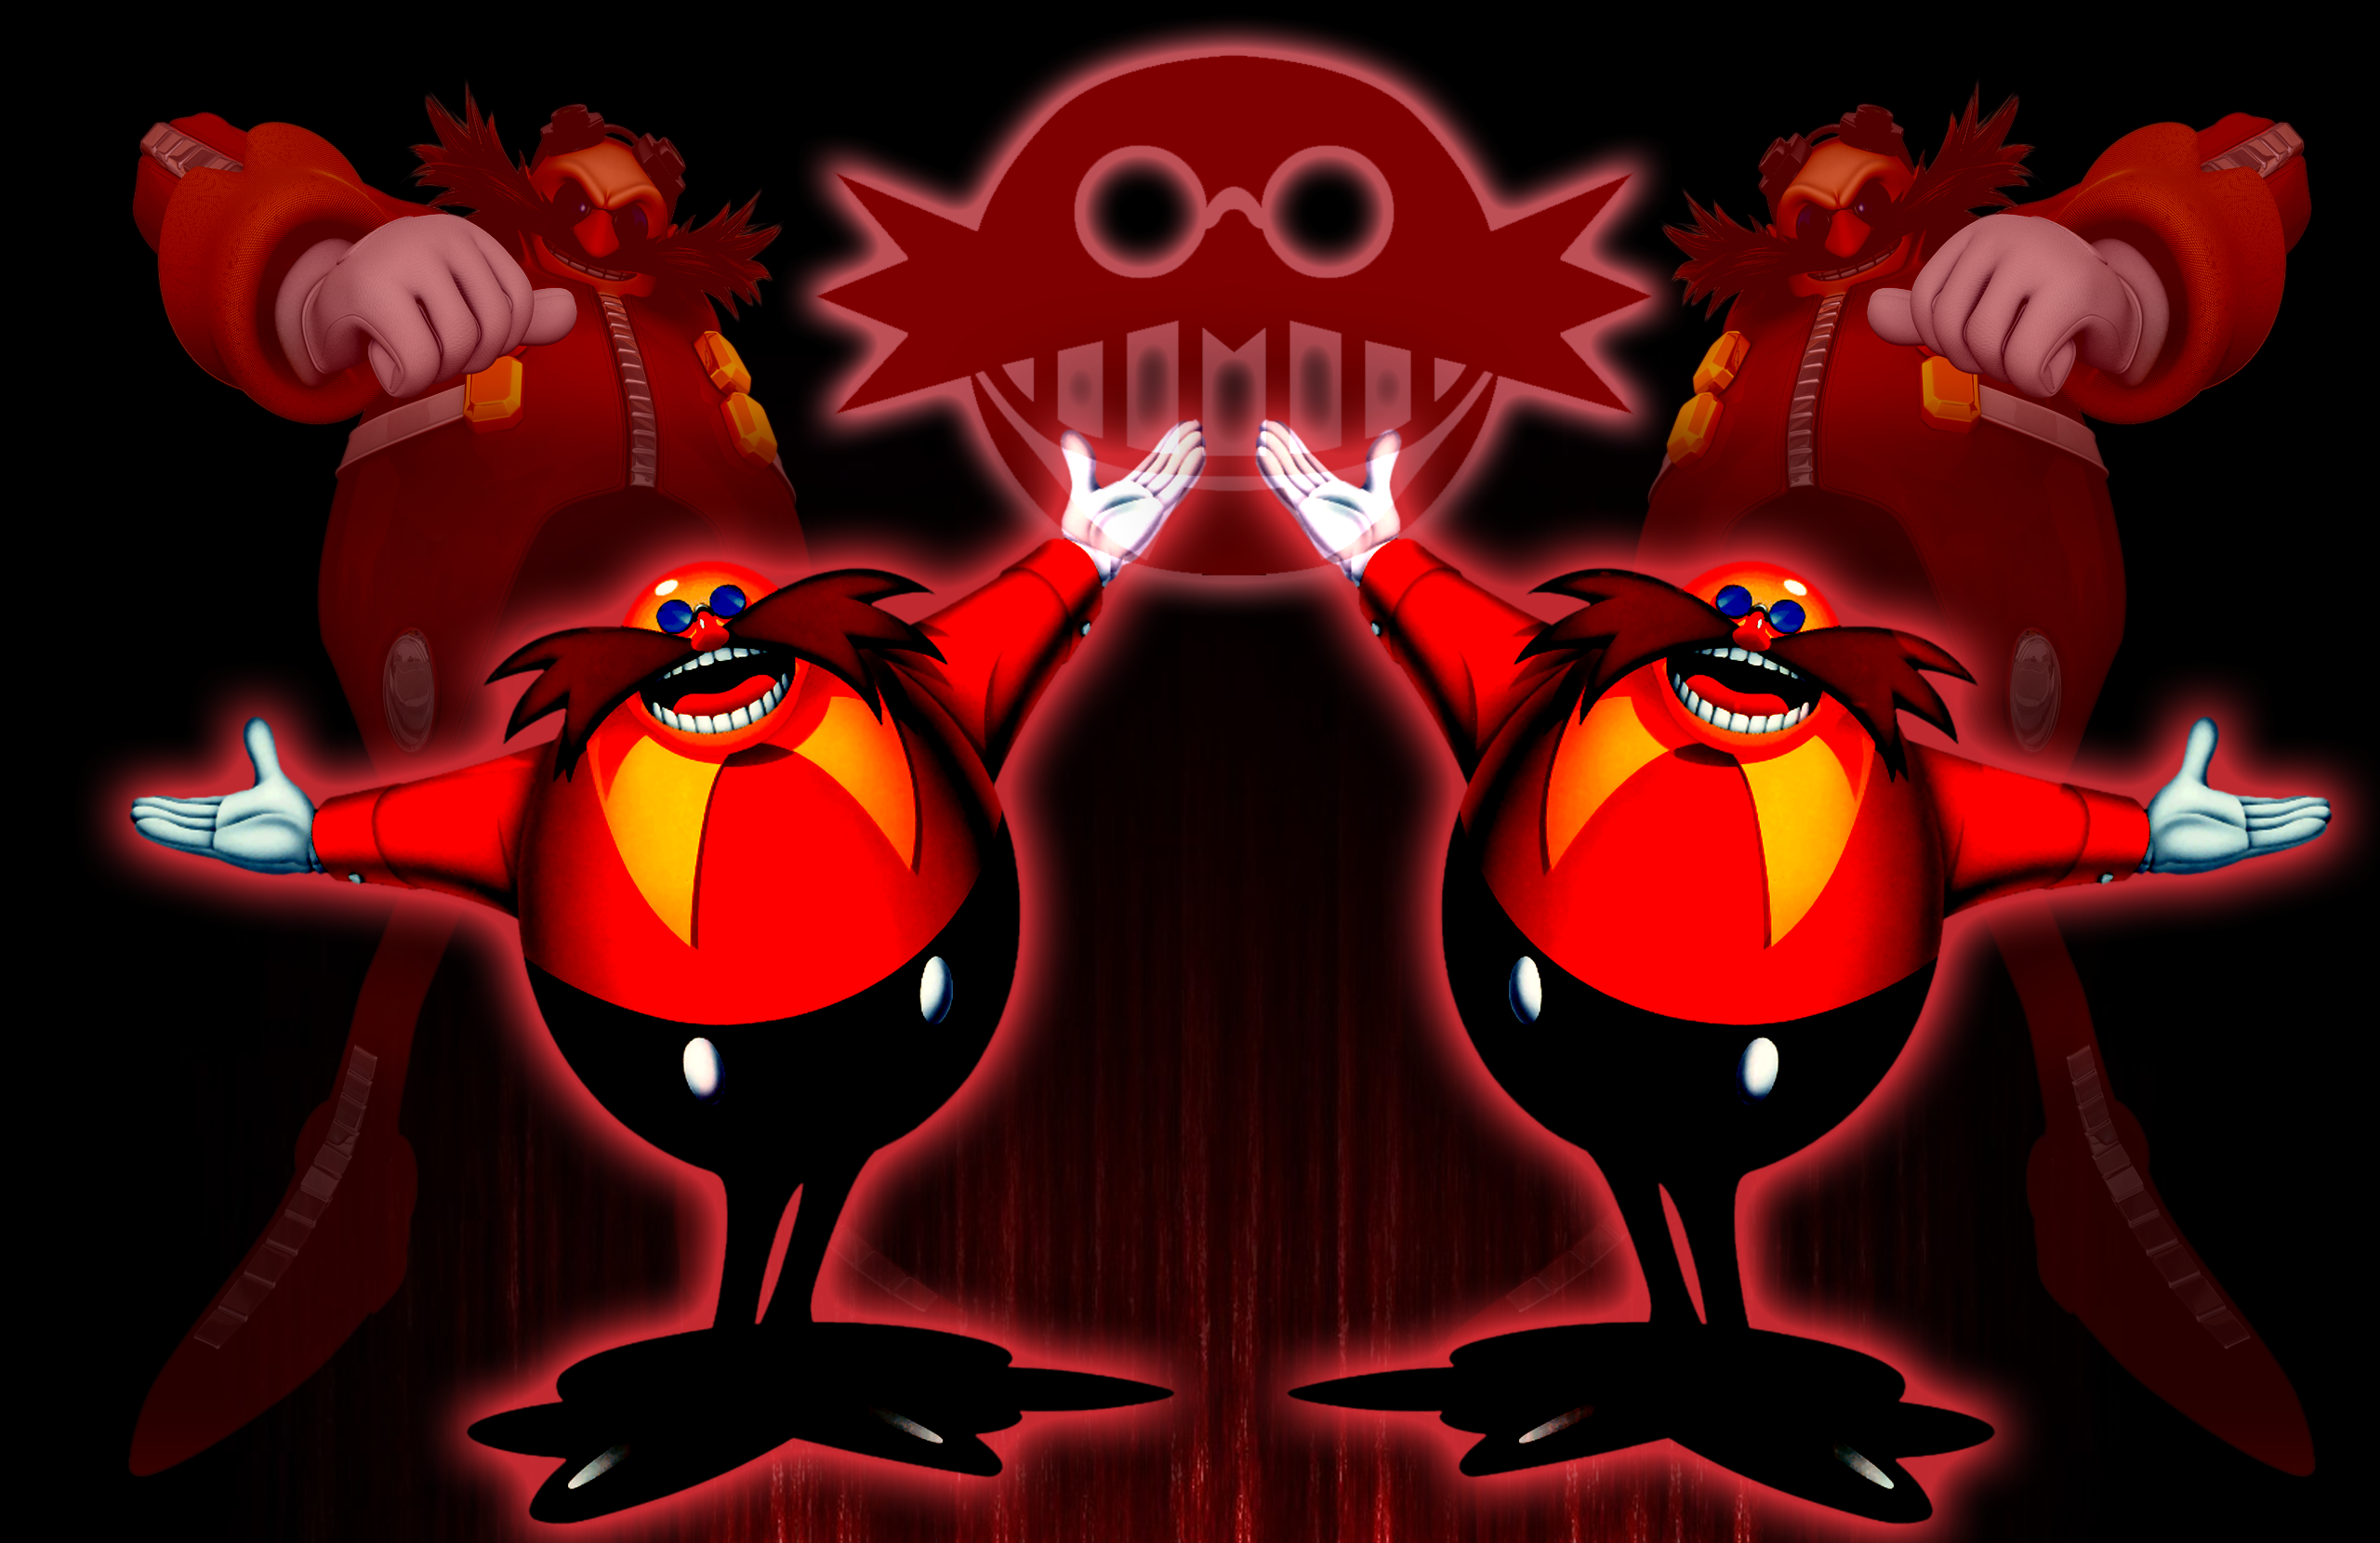 Doctor Eggman Knuckles the Echidna Miles Tails Prower Sonic the Hedgehog  HD Sonic the Hedgehog 2 Wallpapers  HD Wallpapers  ID 101166